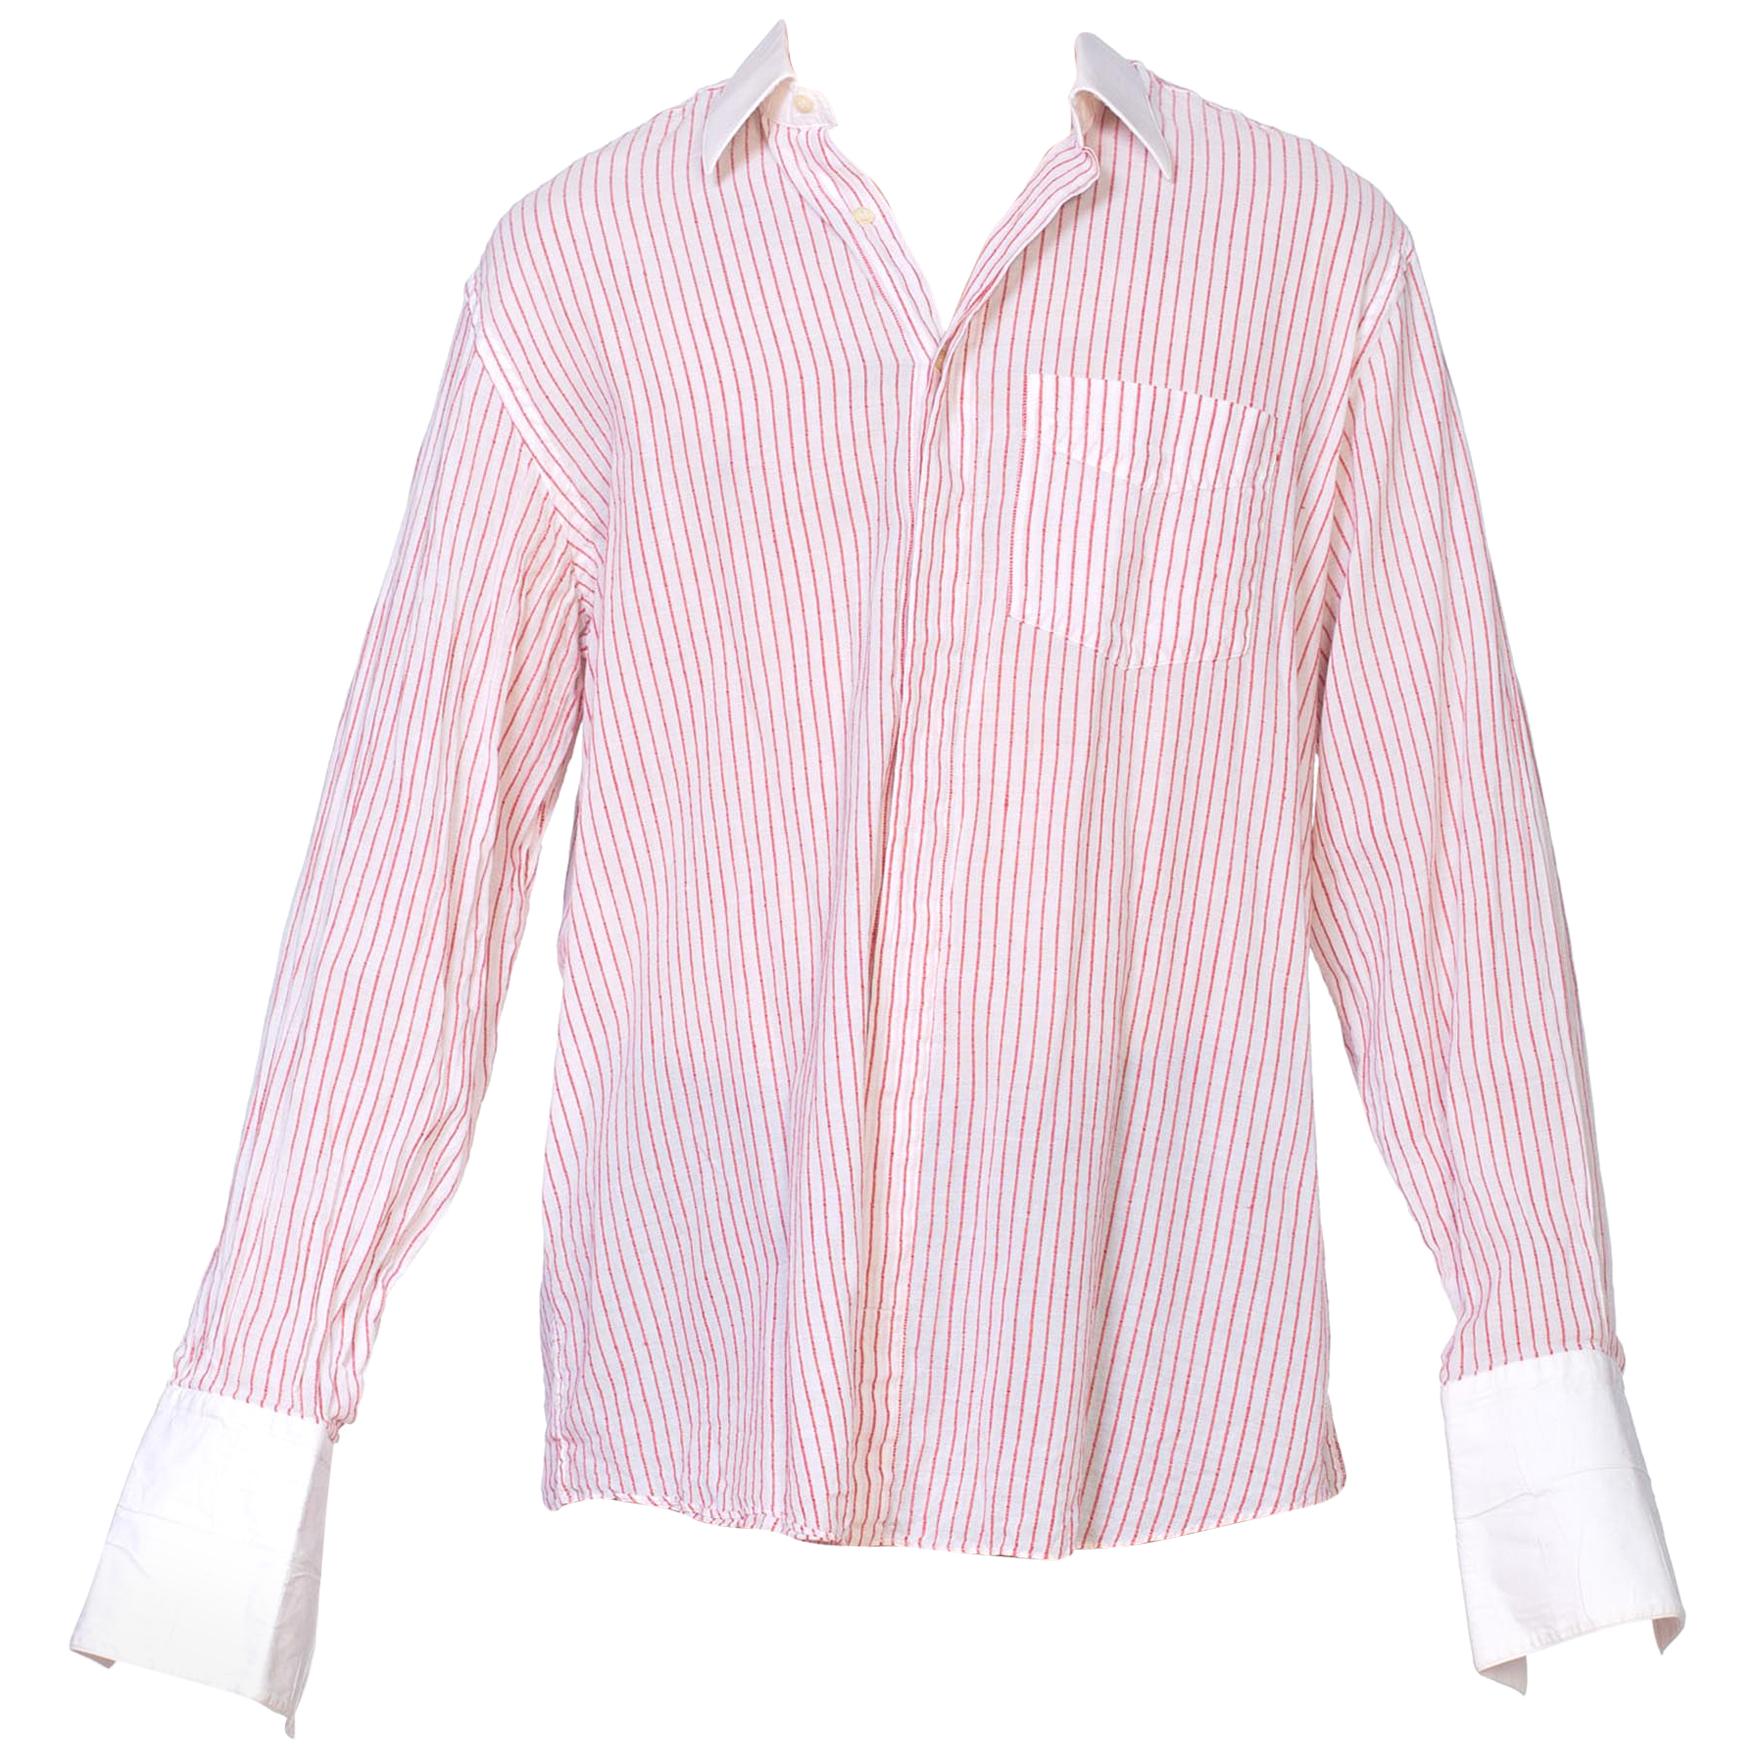 1970'S ARTIOLI Red & White Cotton Bespoke Men's  Shirt With French Cuffs